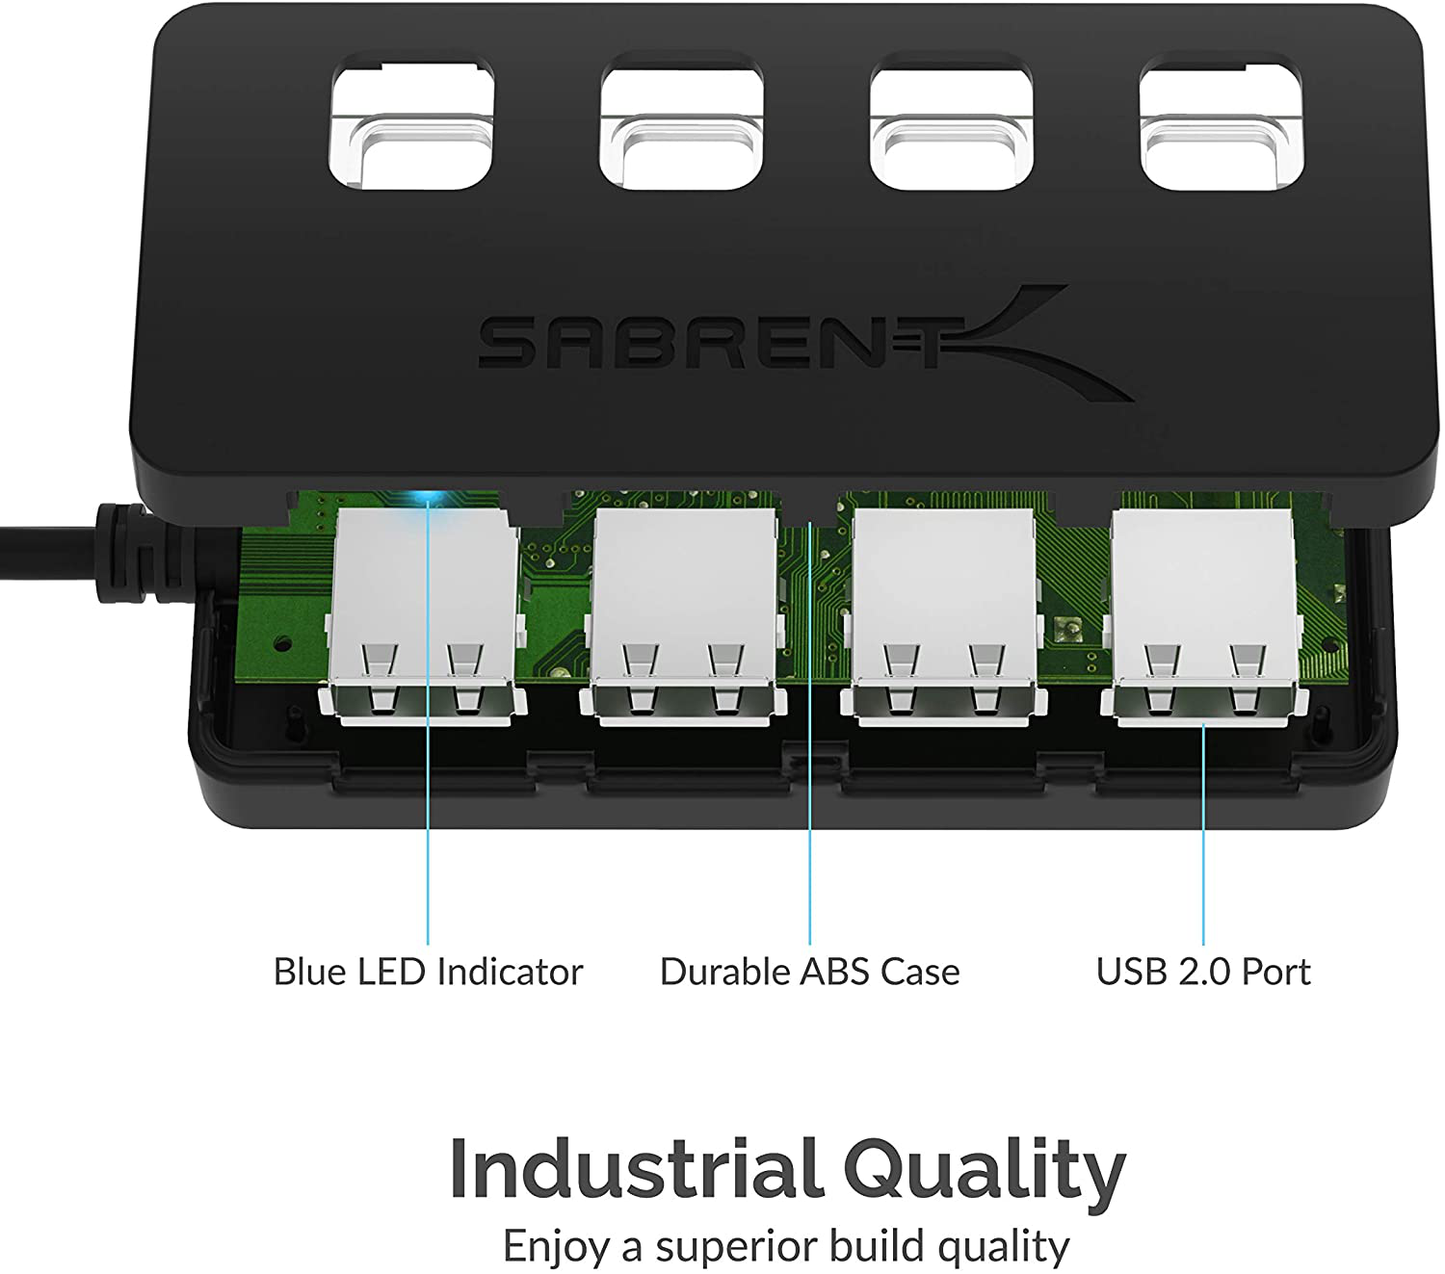 Sabrent 4-Port USB 2.0 Hub with Individual LED lit Power Switches (HB-UMLS)